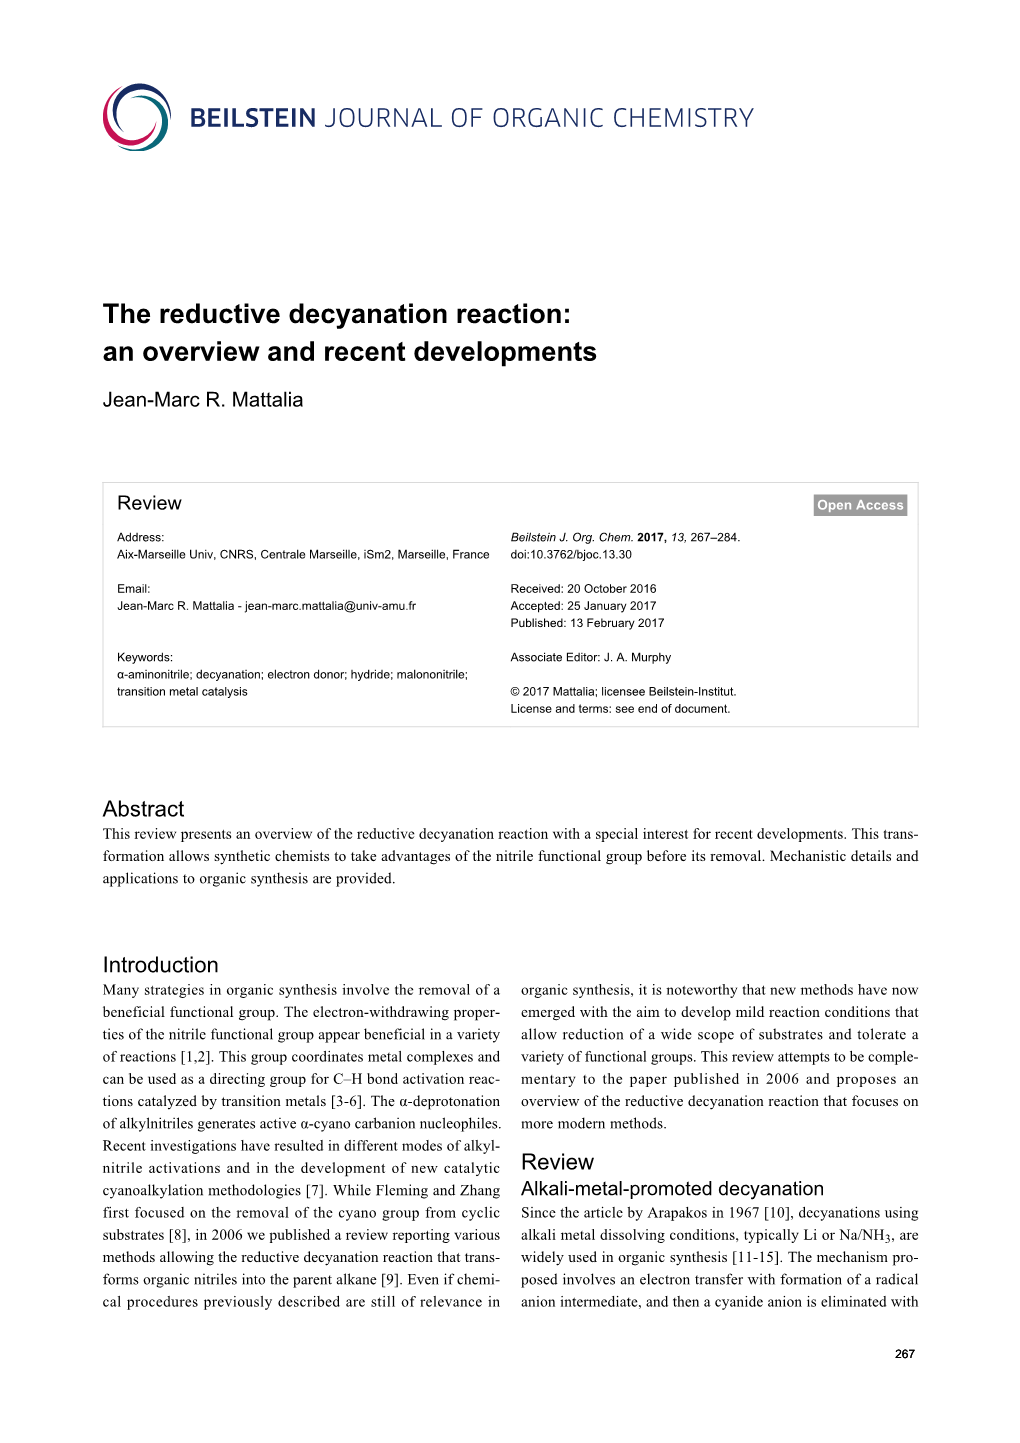 The Reductive Decyanation Reaction: an Overview and Recent Developments